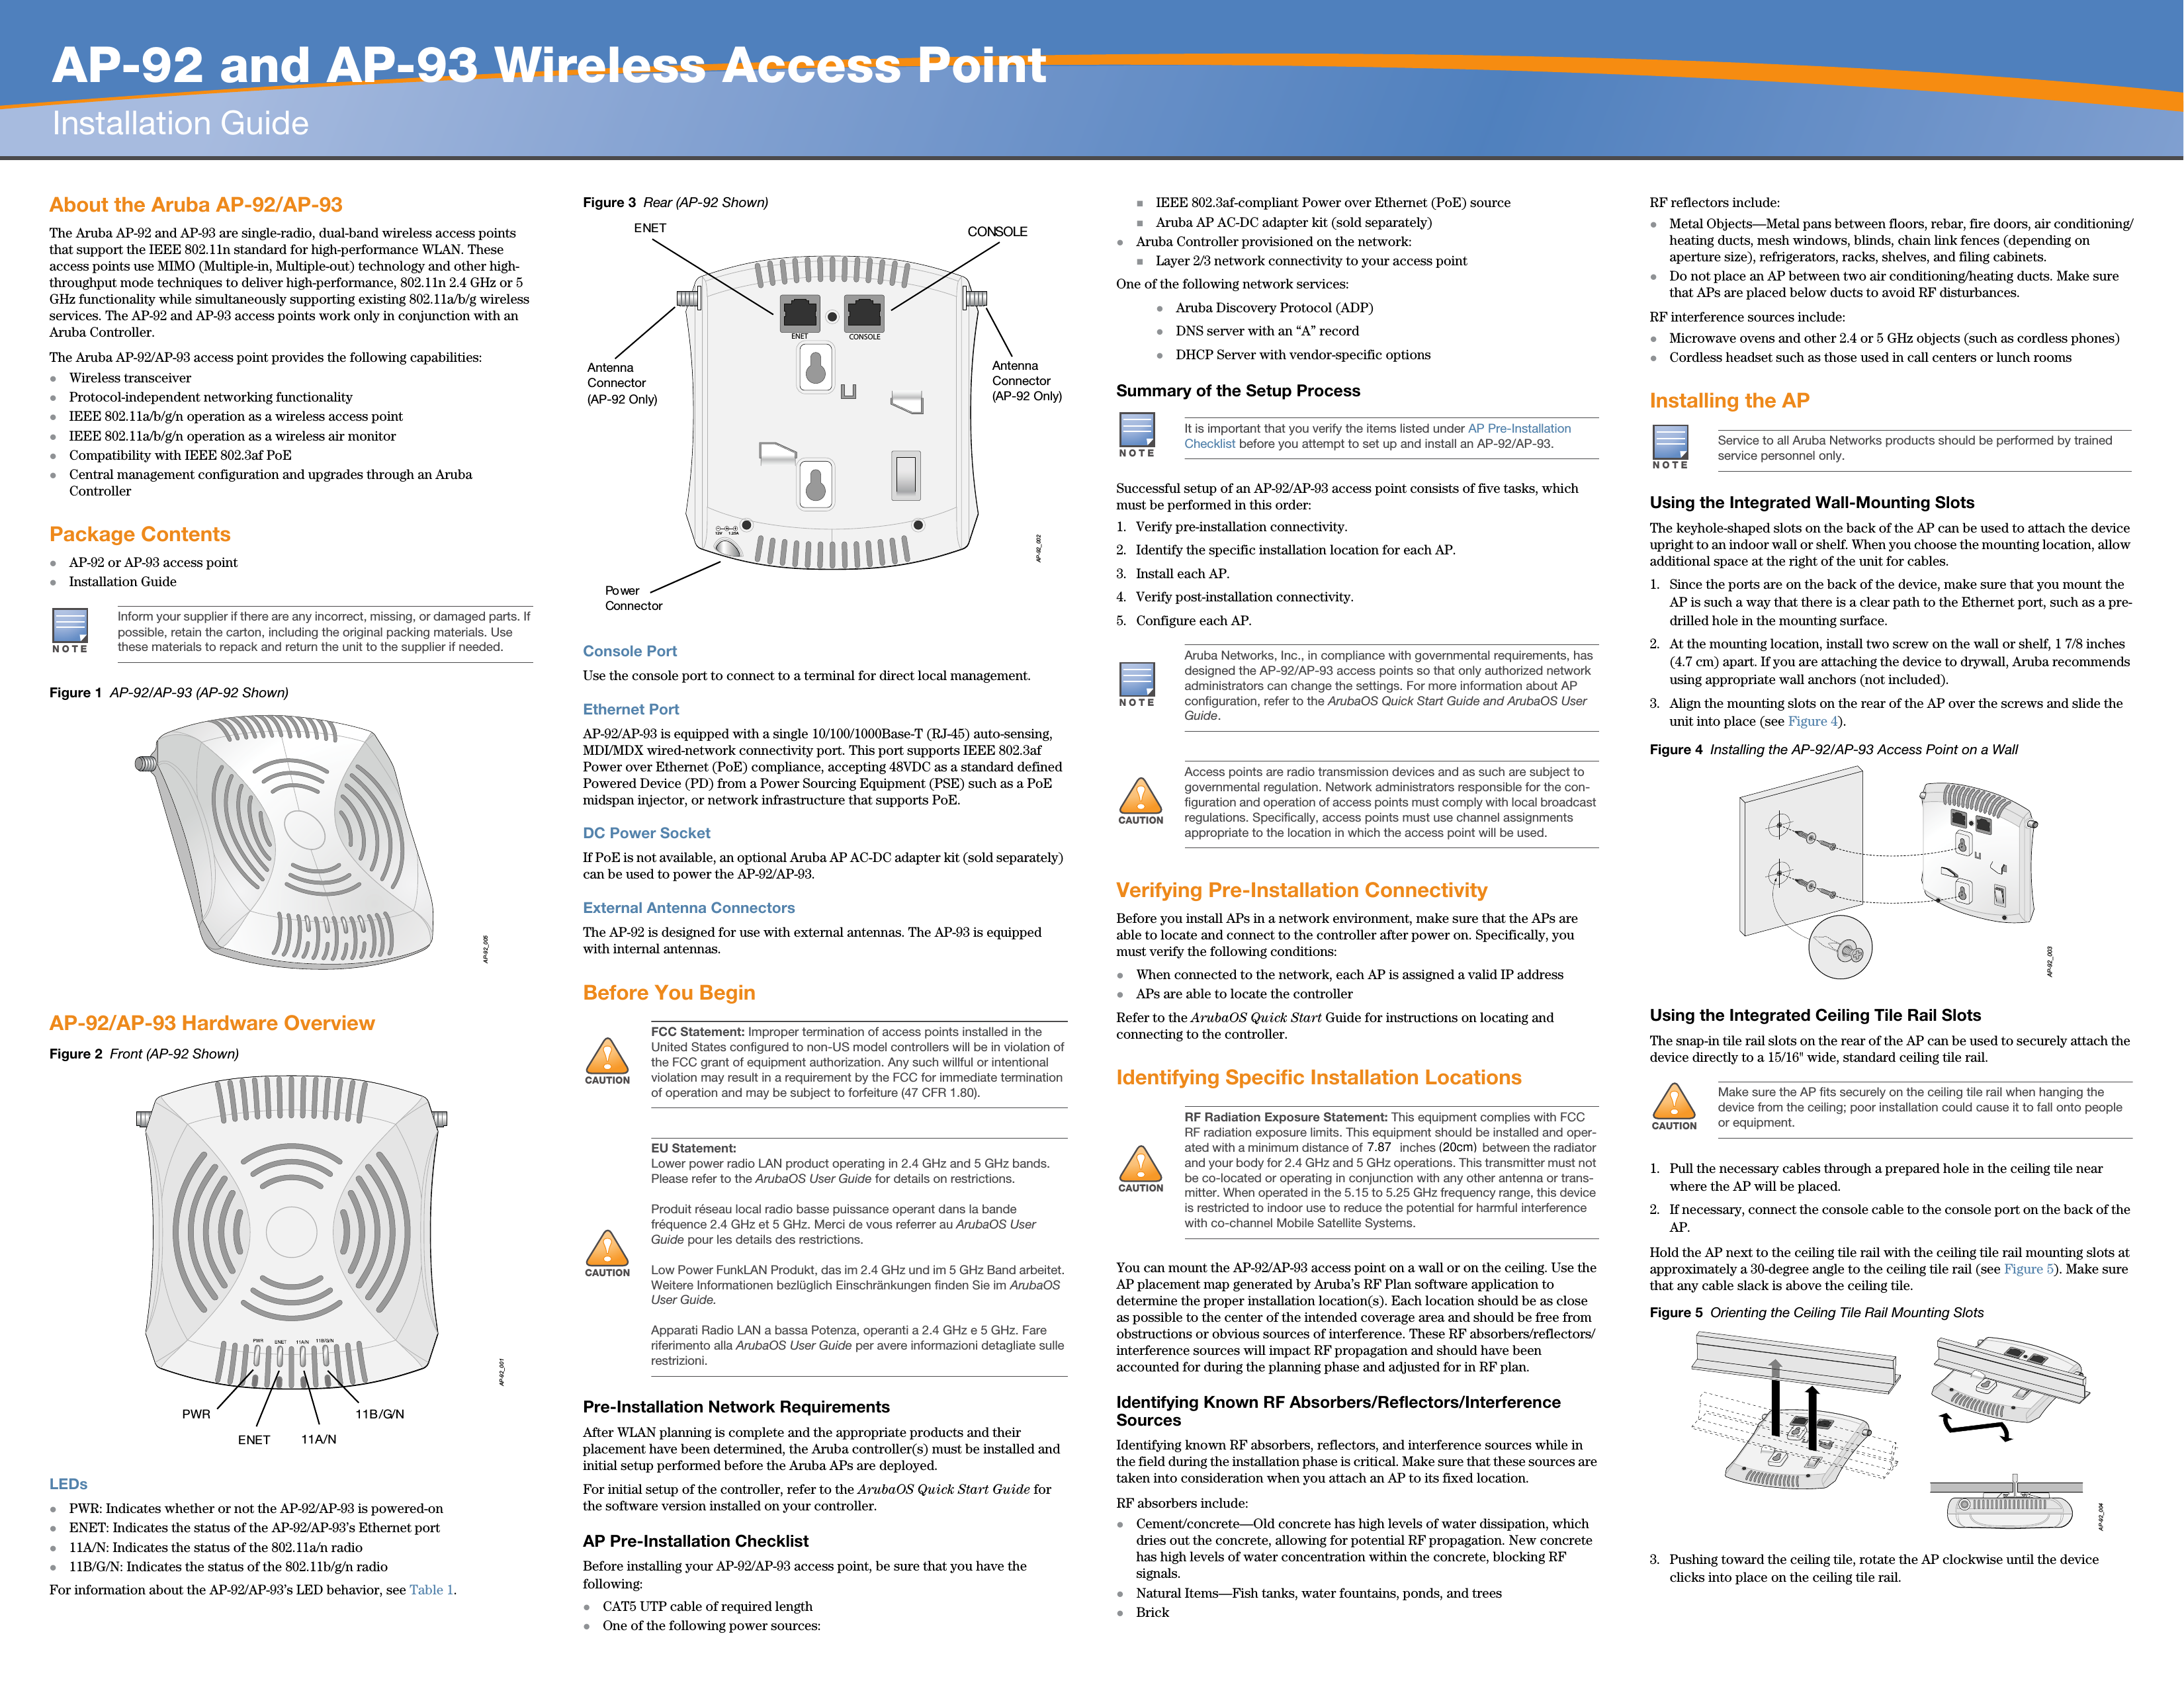   AP-92 and AP-93 Wireless Access PointInstallation GuideAbout the Aruba AP-92/AP-93The Aruba AP-92 and AP-93 are single-radio, dual-band wireless access points that support the IEEE 802.11n standard for high-performance WLAN. These access points use MIMO (Multiple-in, Multiple-out) technology and other high-throughput mode techniques to deliver high-performance, 802.11n 2.4 GHz or 5 GHz functionality while simultaneously supporting existing 802.11a/b/g wireless services. The AP-92 and AP-93 access points work only in conjunction with an Aruba Controller.The Aruba AP-92/AP-93 access point provides the following capabilities:zWireless transceiverzProtocol-independent networking functionalityzIEEE 802.11a/b/g/n operation as a wireless access pointzIEEE 802.11a/b/g/n operation as a wireless air monitorzCompatibility with IEEE 802.3af PoE zCentral management configuration and upgrades through an Aruba ControllerPackage ContentszAP-92 or AP-93 access pointzInstallation GuideFigure 1  AP-92/AP-93 (AP-92 Shown)AP-92/AP-93 Hardware OverviewFigure 2  Front (AP-92 Shown)LEDszPWR: Indicates whether or not the AP-92/AP-93 is powered-onzENET: Indicates the status of the AP-92/AP-93’s Ethernet portz11A/N: Indicates the status of the 802.11a/n radioz11B/G/N: Indicates the status of the 802.11b/g/n radioFor information about the AP-92/AP-93’s LED behavior, see Table 1.Figure 3  Rear (AP-92 Shown)Console PortUse the console port to connect to a terminal for direct local management.Ethernet PortAP-92/AP-93 is equipped with a single 10/100/1000Base-T (RJ-45) auto-sensing, MDI/MDX wired-network connectivity port. This port supports IEEE 802.3af Power over Ethernet (PoE) compliance, accepting 48VDC as a standard defined Powered Device (PD) from a Power Sourcing Equipment (PSE) such as a PoE midspan injector, or network infrastructure that supports PoE.DC Power SocketIf PoE is not available, an optional Aruba AP AC-DC adapter kit (sold separately) can be used to power the AP-92/AP-93. External Antenna ConnectorsThe AP-92 is designed for use with external antennas. The AP-93 is equipped with internal antennas.Before You BeginPre-Installation Network RequirementsAfter WLAN planning is complete and the appropriate products and their placement have been determined, the Aruba controller(s) must be installed and initial setup performed before the Aruba APs are deployed.For initial setup of the controller, refer to the ArubaOS Quick Start Guide for the software version installed on your controller.AP Pre-Installation ChecklistBefore installing your AP-92/AP-93 access point, be sure that you have the following:zCAT5 UTP cable of required lengthzOne of the following power sources:IEEE 802.3af-compliant Power over Ethernet (PoE) sourceAruba AP AC-DC adapter kit (sold separately)zAruba Controller provisioned on the network:Layer 2/3 network connectivity to your access pointOne of the following network services:zAruba Discovery Protocol (ADP)zDNS server with an “A” recordzDHCP Server with vendor-specific optionsSummary of the Setup ProcessSuccessful setup of an AP-92/AP-93 access point consists of five tasks, which must be performed in this order:1. Verify pre-installation connectivity.2. Identify the specific installation location for each AP.3. Install each AP.4. Verify post-installation connectivity.5. Configure each AP.Verifying Pre-Installation ConnectivityBefore you install APs in a network environment, make sure that the APs are able to locate and connect to the controller after power on. Specifically, you must verify the following conditions:zWhen connected to the network, each AP is assigned a valid IP addresszAPs are able to locate the controller Refer to the ArubaOS Quick Start Guide for instructions on locating and connecting to the controller.Identifying Specific Installation LocationsYou can mount the AP-92/AP-93 access point on a wall or on the ceiling. Use the AP placement map generated by Aruba’s RF Plan software application to determine the proper installation location(s). Each location should be as close as possible to the center of the intended coverage area and should be free from obstructions or obvious sources of interference. These RF absorbers/reflectors/interference sources will impact RF propagation and should have been accounted for during the planning phase and adjusted for in RF plan.Identifying Known RF Absorbers/Reflectors/Interference SourcesIdentifying known RF absorbers, reflectors, and interference sources while in the field during the installation phase is critical. Make sure that these sources are taken into consideration when you attach an AP to its fixed location.RF absorbers include:zCement/concrete—Old concrete has high levels of water dissipation, which dries out the concrete, allowing for potential RF propagation. New concrete has high levels of water concentration within the concrete, blocking RF signals.zNatural Items—Fish tanks, water fountains, ponds, and treeszBrickRF reflectors include:zMetal Objects—Metal pans between floors, rebar, fire doors, air conditioning/heating ducts, mesh windows, blinds, chain link fences (depending on aperture size), refrigerators, racks, shelves, and filing cabinets.zDo not place an AP between two air conditioning/heating ducts. Make sure that APs are placed below ducts to avoid RF disturbances.RF interference sources include:zMicrowave ovens and other 2.4 or 5 GHz objects (such as cordless phones)zCordless headset such as those used in call centers or lunch roomsInstalling the APUsing the Integrated Wall-Mounting SlotsThe keyhole-shaped slots on the back of the AP can be used to attach the device upright to an indoor wall or shelf. When you choose the mounting location, allow additional space at the right of the unit for cables.1. Since the ports are on the back of the device, make sure that you mount the AP is such a way that there is a clear path to the Ethernet port, such as a pre-drilled hole in the mounting surface.2. At the mounting location, install two screw on the wall or shelf, 1 7/8 inches (4.7 cm) apart. If you are attaching the device to drywall, Aruba recommends using appropriate wall anchors (not included).3. Align the mounting slots on the rear of the AP over the screws and slide the unit into place (see Figure 4).Figure 4  Installing the AP-92/AP-93 Access Point on a WallUsing the Integrated Ceiling Tile Rail SlotsThe snap-in tile rail slots on the rear of the AP can be used to securely attach the device directly to a 15/16&quot; wide, standard ceiling tile rail.1. Pull the necessary cables through a prepared hole in the ceiling tile near where the AP will be placed.2. If necessary, connect the console cable to the console port on the back of the AP.Hold the AP next to the ceiling tile rail with the ceiling tile rail mounting slots at approximately a 30-degree angle to the ceiling tile rail (see Figure 5). Make sure that any cable slack is above the ceiling tile.Figure 5  Orienting the Ceiling Tile Rail Mounting Slots3. Pushing toward the ceiling tile, rotate the AP clockwise until the device clicks into place on the ceiling tile rail.NOTEInform your supplier if there are any incorrect, missing, or damaged parts. If possible, retain the carton, including the original packing materials. Use these materials to repack and return the unit to the supplier if needed.AP-92_005AP-92_001PWRENET11A/N11B/G/N!CAUTIONFCC Statement: Improper termination of access points installed in the United States configured to non-US model controllers will be in violation of the FCC grant of equipment authorization. Any such willful or intentional violation may result in a requirement by the FCC for immediate termination of operation and may be subject to forfeiture (47 CFR 1.80).!CAUTIONEU Statement: Lower power radio LAN product operating in 2.4 GHz and 5 GHz bands. Please refer to the ArubaOS User Guide for details on restrictions.Produit réseau local radio basse puissance operant dans la bande fréquence 2.4 GHz et 5 GHz. Merci de vous referrer au ArubaOS User Guide pour les details des restrictions.Low Power FunkLAN Produkt, das im 2.4 GHz und im 5 GHz Band arbeitet. Weitere Informationen bezlüglich Einschränkungen finden Sie im ArubaOS User Guide.Apparati Radio LAN a bassa Potenza, operanti a 2.4 GHz e 5 GHz. Fare riferimento alla ArubaOS User Guide per avere informazioni detagliate sulle restrizioni.AP-92_002CONSOLEENET12V       1.25APo wer ConnectorCONSOLEENETAntenna Connector (AP-92 Only)Antenna Connector(AP-92 Only)NOTEIt is important that you verify the items listed under AP Pre-Installation Checklist before you attempt to set up and install an AP-92/AP-93.NOTEAruba Networks, Inc., in compliance with governmental requirements, has designed the AP-92/AP-93 access points so that only authorized network administrators can change the settings. For more information about AP configuration, refer to the ArubaOS Quick Start Guide and ArubaOS User Guide.!CAUTIONAccess points are radio transmission devices and as such are subject to governmental regulation. Network administrators responsible for the con-figuration and operation of access points must comply with local broadcast regulations. Specifically, access points must use channel assignments appropriate to the location in which the access point will be used.!CAUTIONRF Radiation Exposure Statement: This equipment complies with FCC RF radiation exposure limits. This equipment should be installed and oper-ated with a minimum distance of 13.78 inches (35 cm) between the radiator and your body for 2.4 GHz and 5 GHz operations. This transmitter must not be co-located or operating in conjunction with any other antenna or trans-mitter. When operated in the 5.15 to 5.25 GHz frequency range, this device is restricted to indoor use to reduce the potential for harmful interference with co-channel Mobile Satellite Systems.NOTEService to all Aruba Networks products should be performed by trained service personnel only.!CAUTIONMake sure the AP fits securely on the ceiling tile rail when hanging the device from the ceiling; poor installation could cause it to fall onto people or equipment.AP-92_003AP-92_0047.87(20cm)